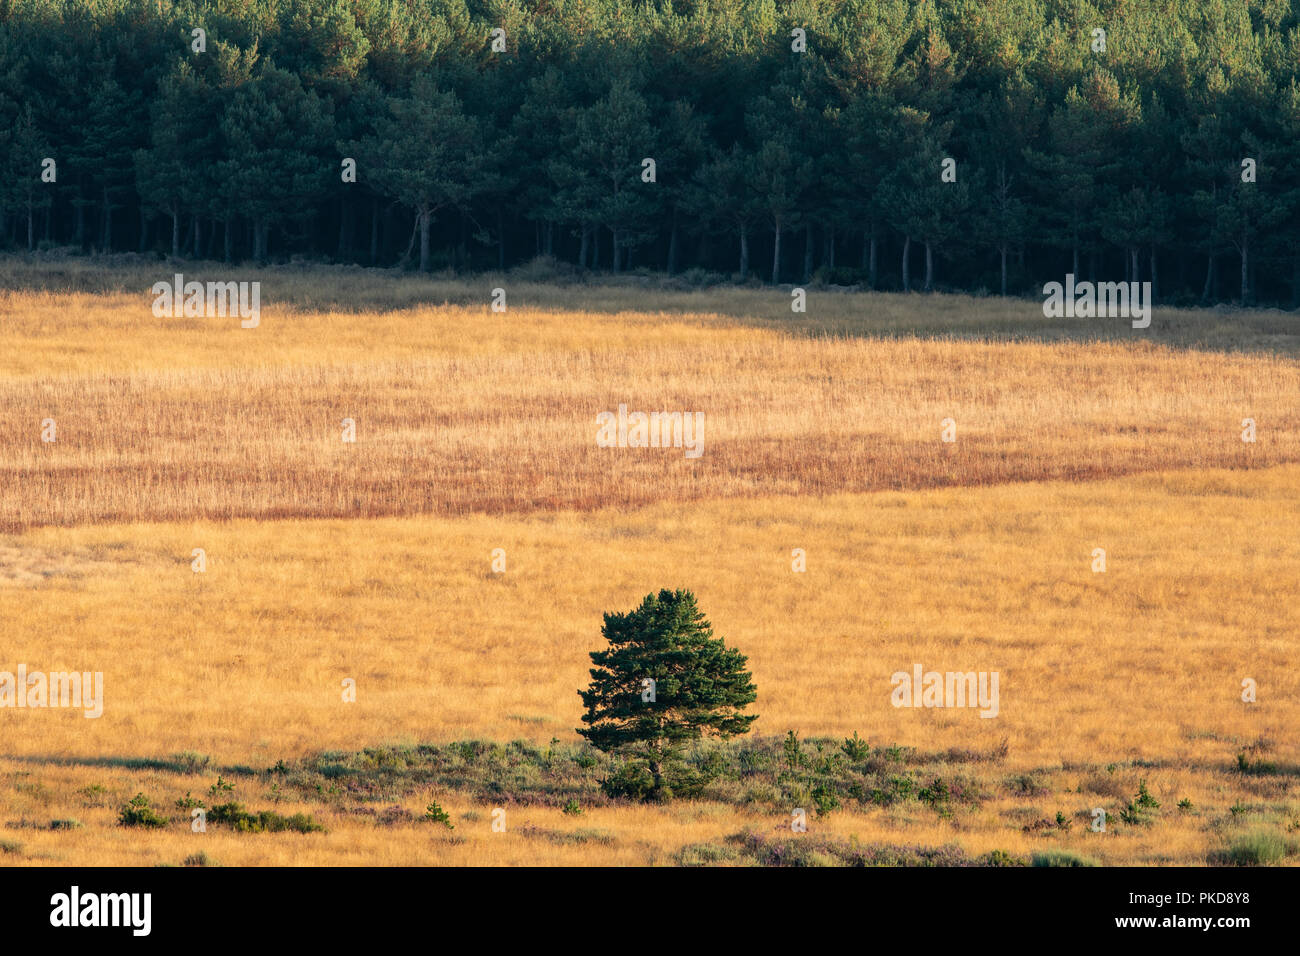 Isolated tree in cultivated land near pine tree forest Stock Photo